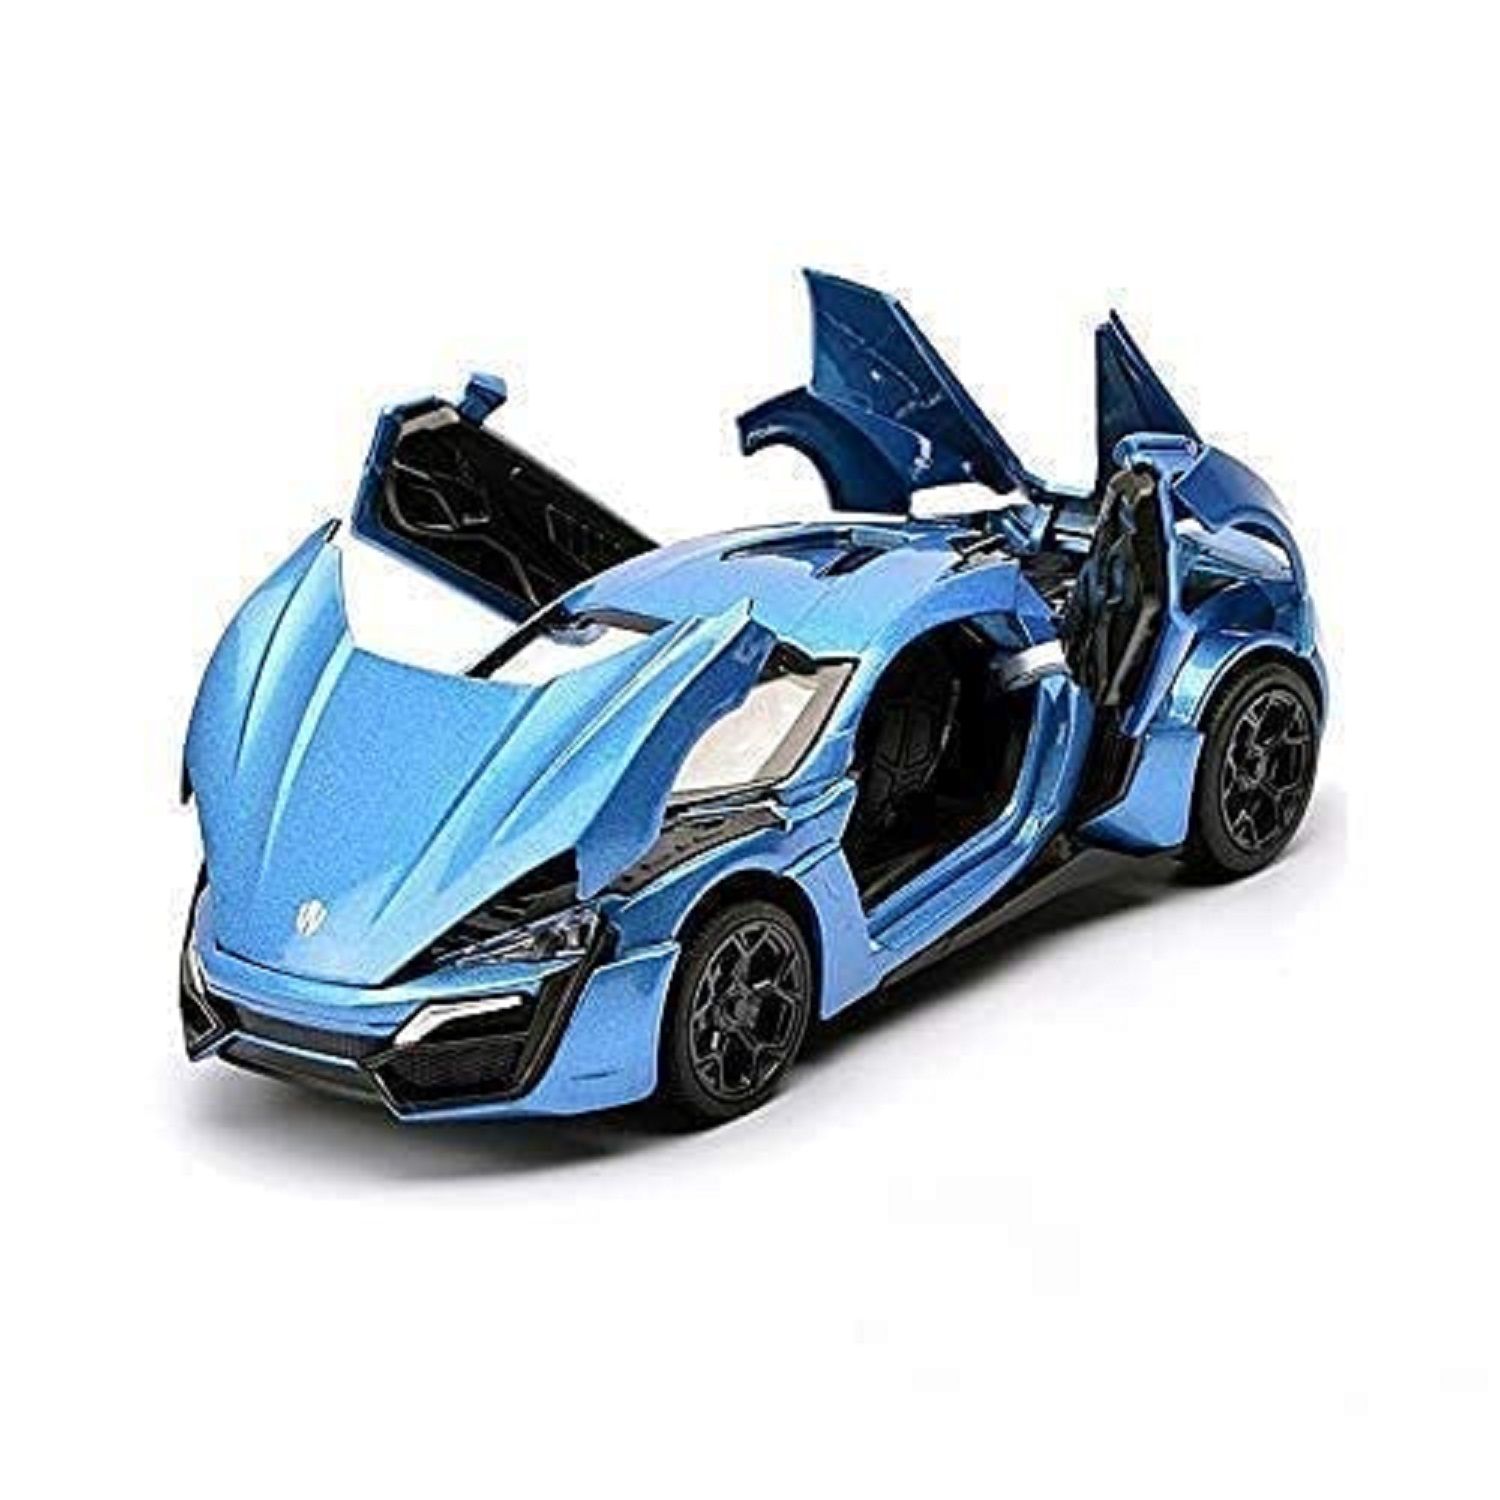 KTRS ENTERPRISE 1/32  Hyper Sport Diecast Metal Pullback Toy car with Openable Doors & Light, Music Boys car for Kids Best Toys Gifts Toys